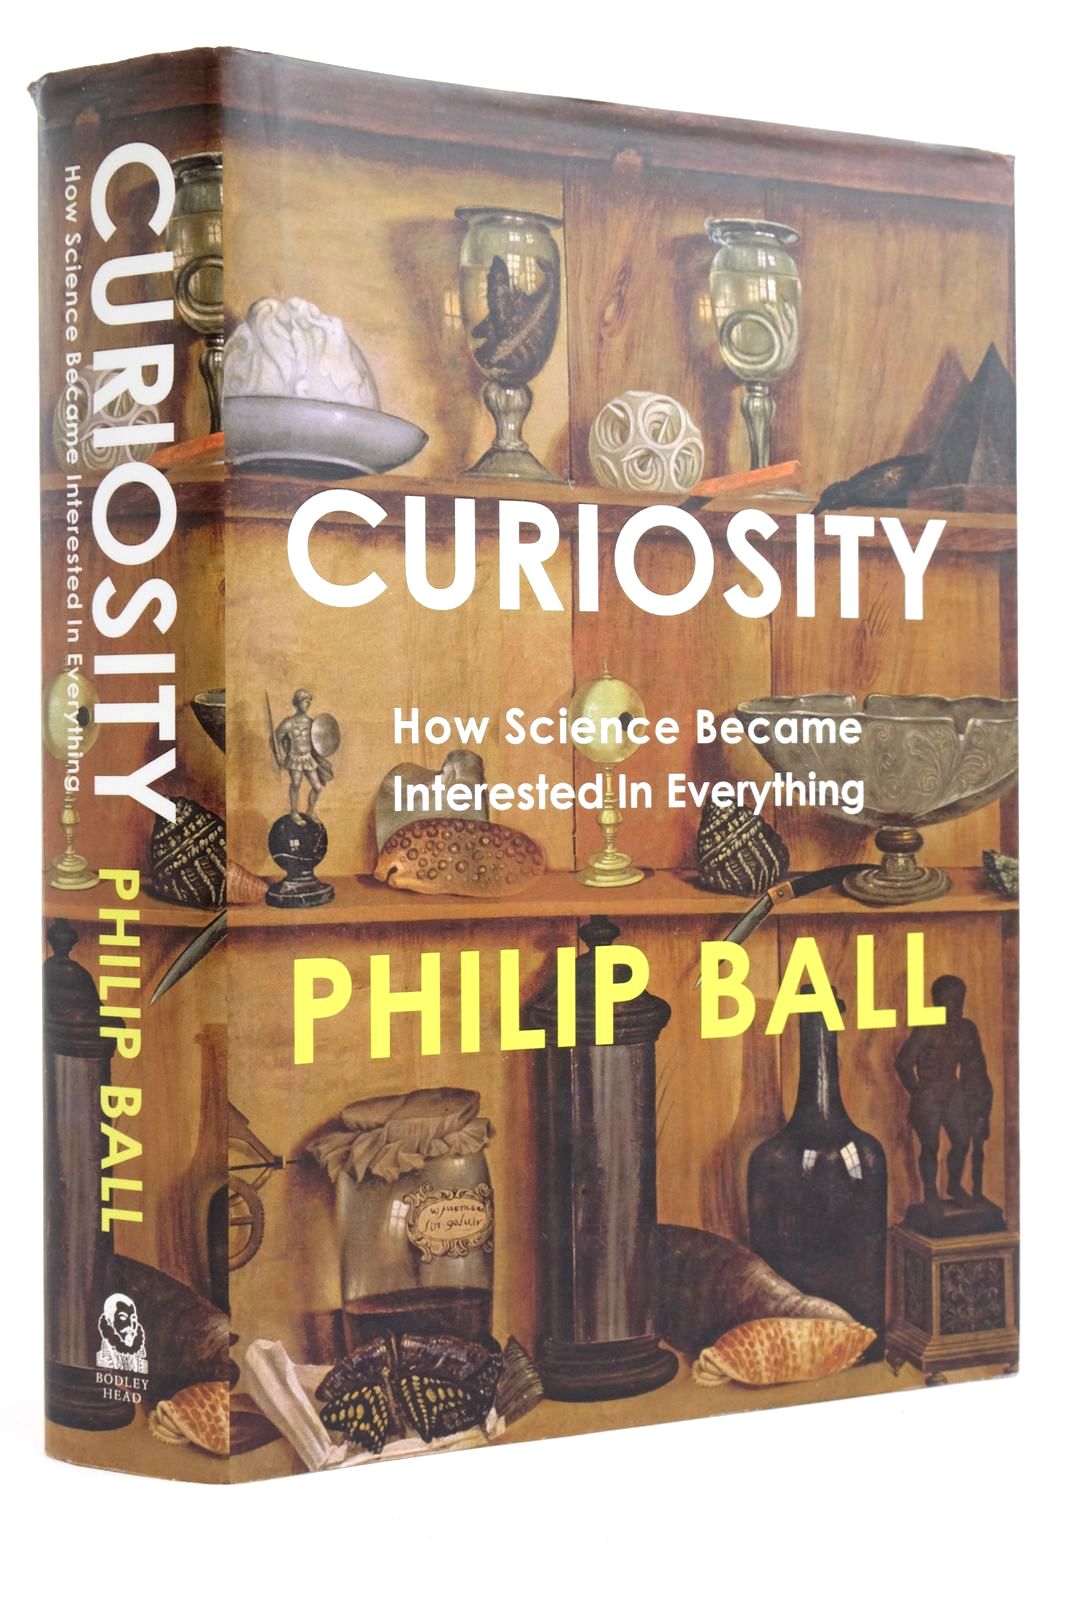 Photo of CURIOSITY HOW SCIENCE BECAME INTERESTED IN EVERYTHING written by Ball, Philip published by The Bodley Head (STOCK CODE: 2135672)  for sale by Stella & Rose's Books